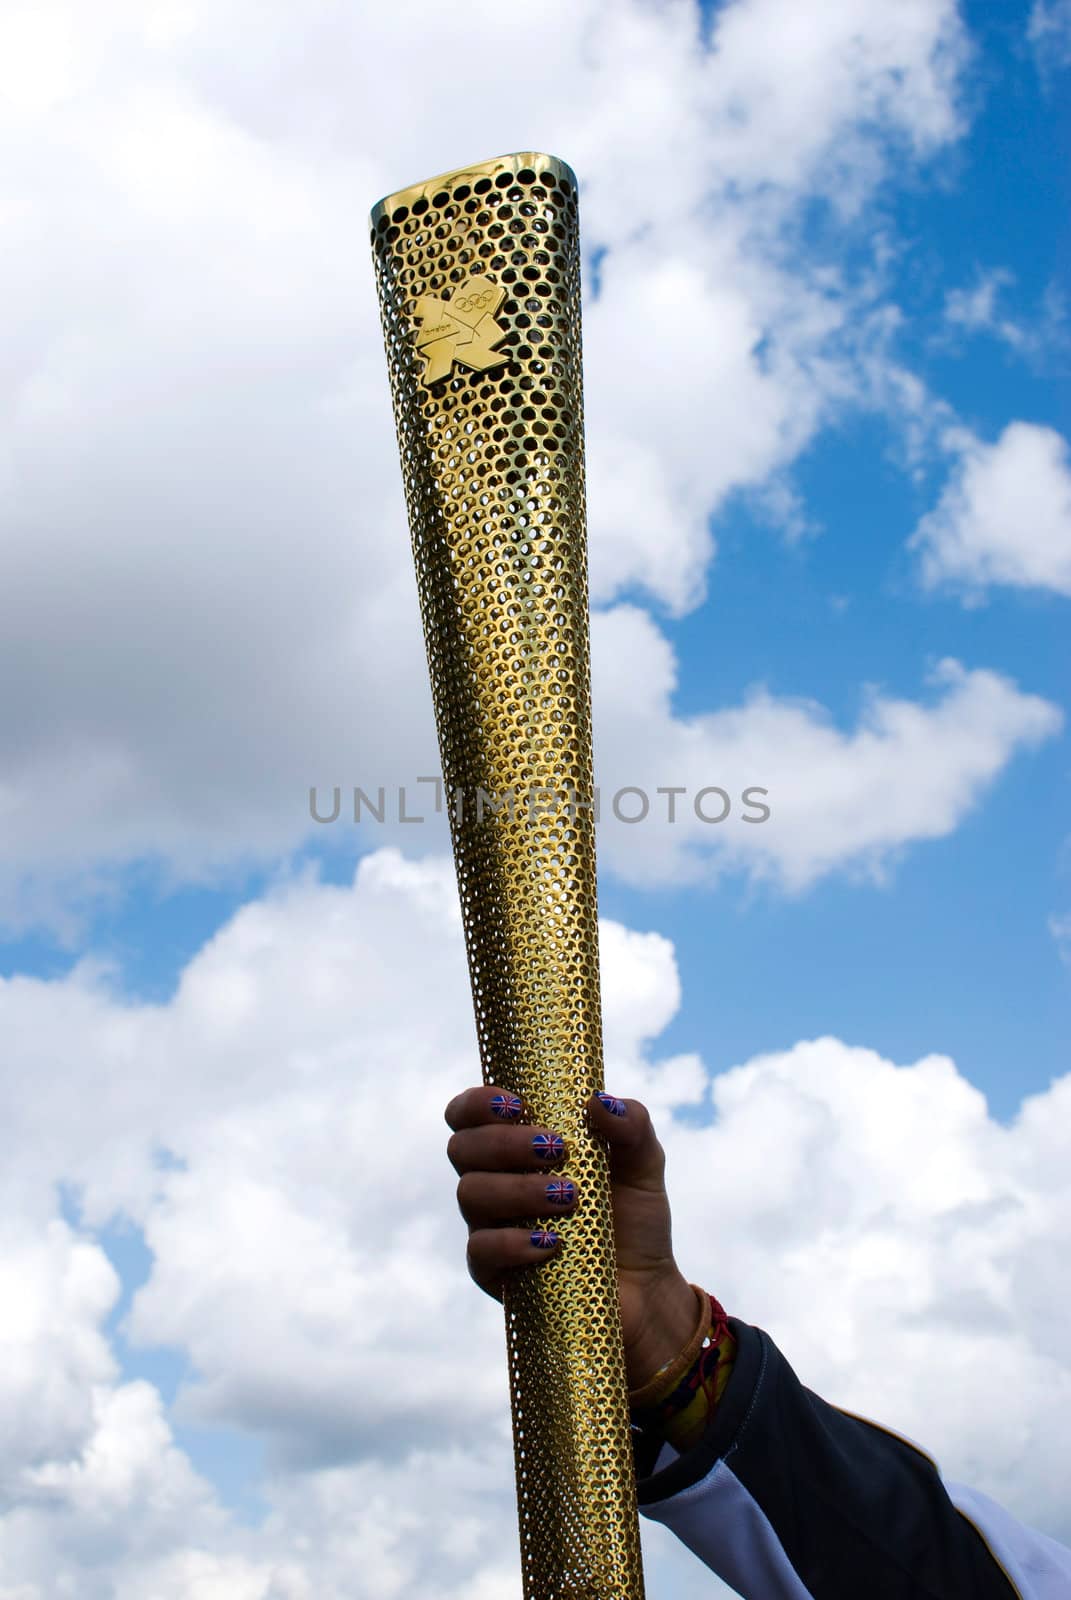 LONDON, UNITED KINGDOM-JULY 21: Olympic games volunteer holding the torch at Greenwich on July 21, 2012 in London, UK. The event is from July 27 to August 12, 2012.